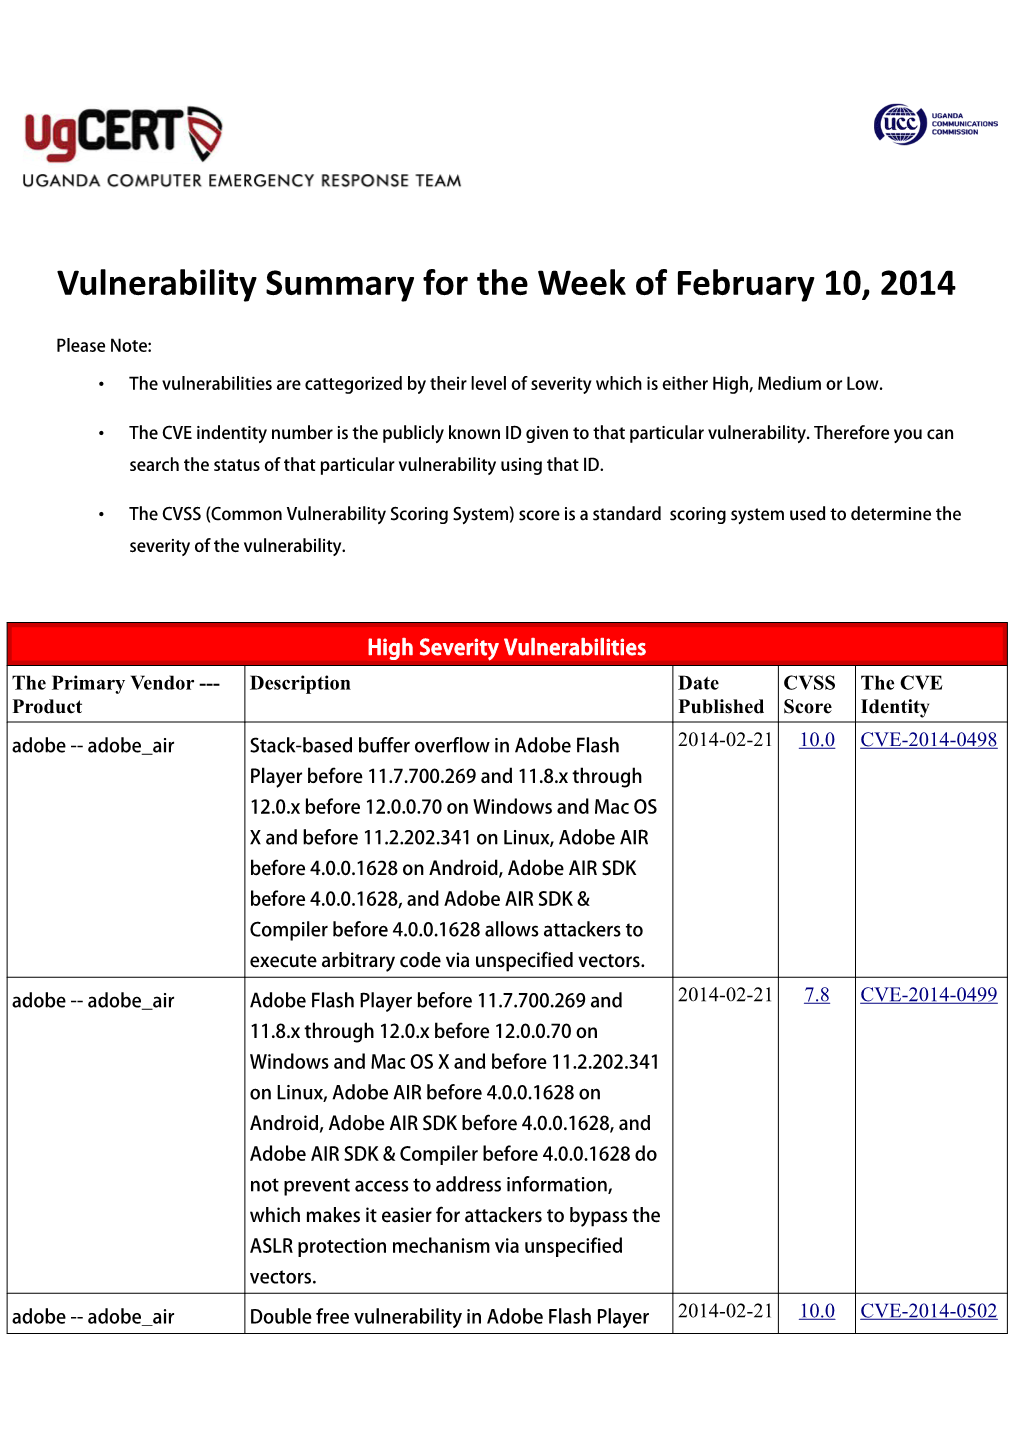 Vulnerability Summary for the Week of February 10, 2014